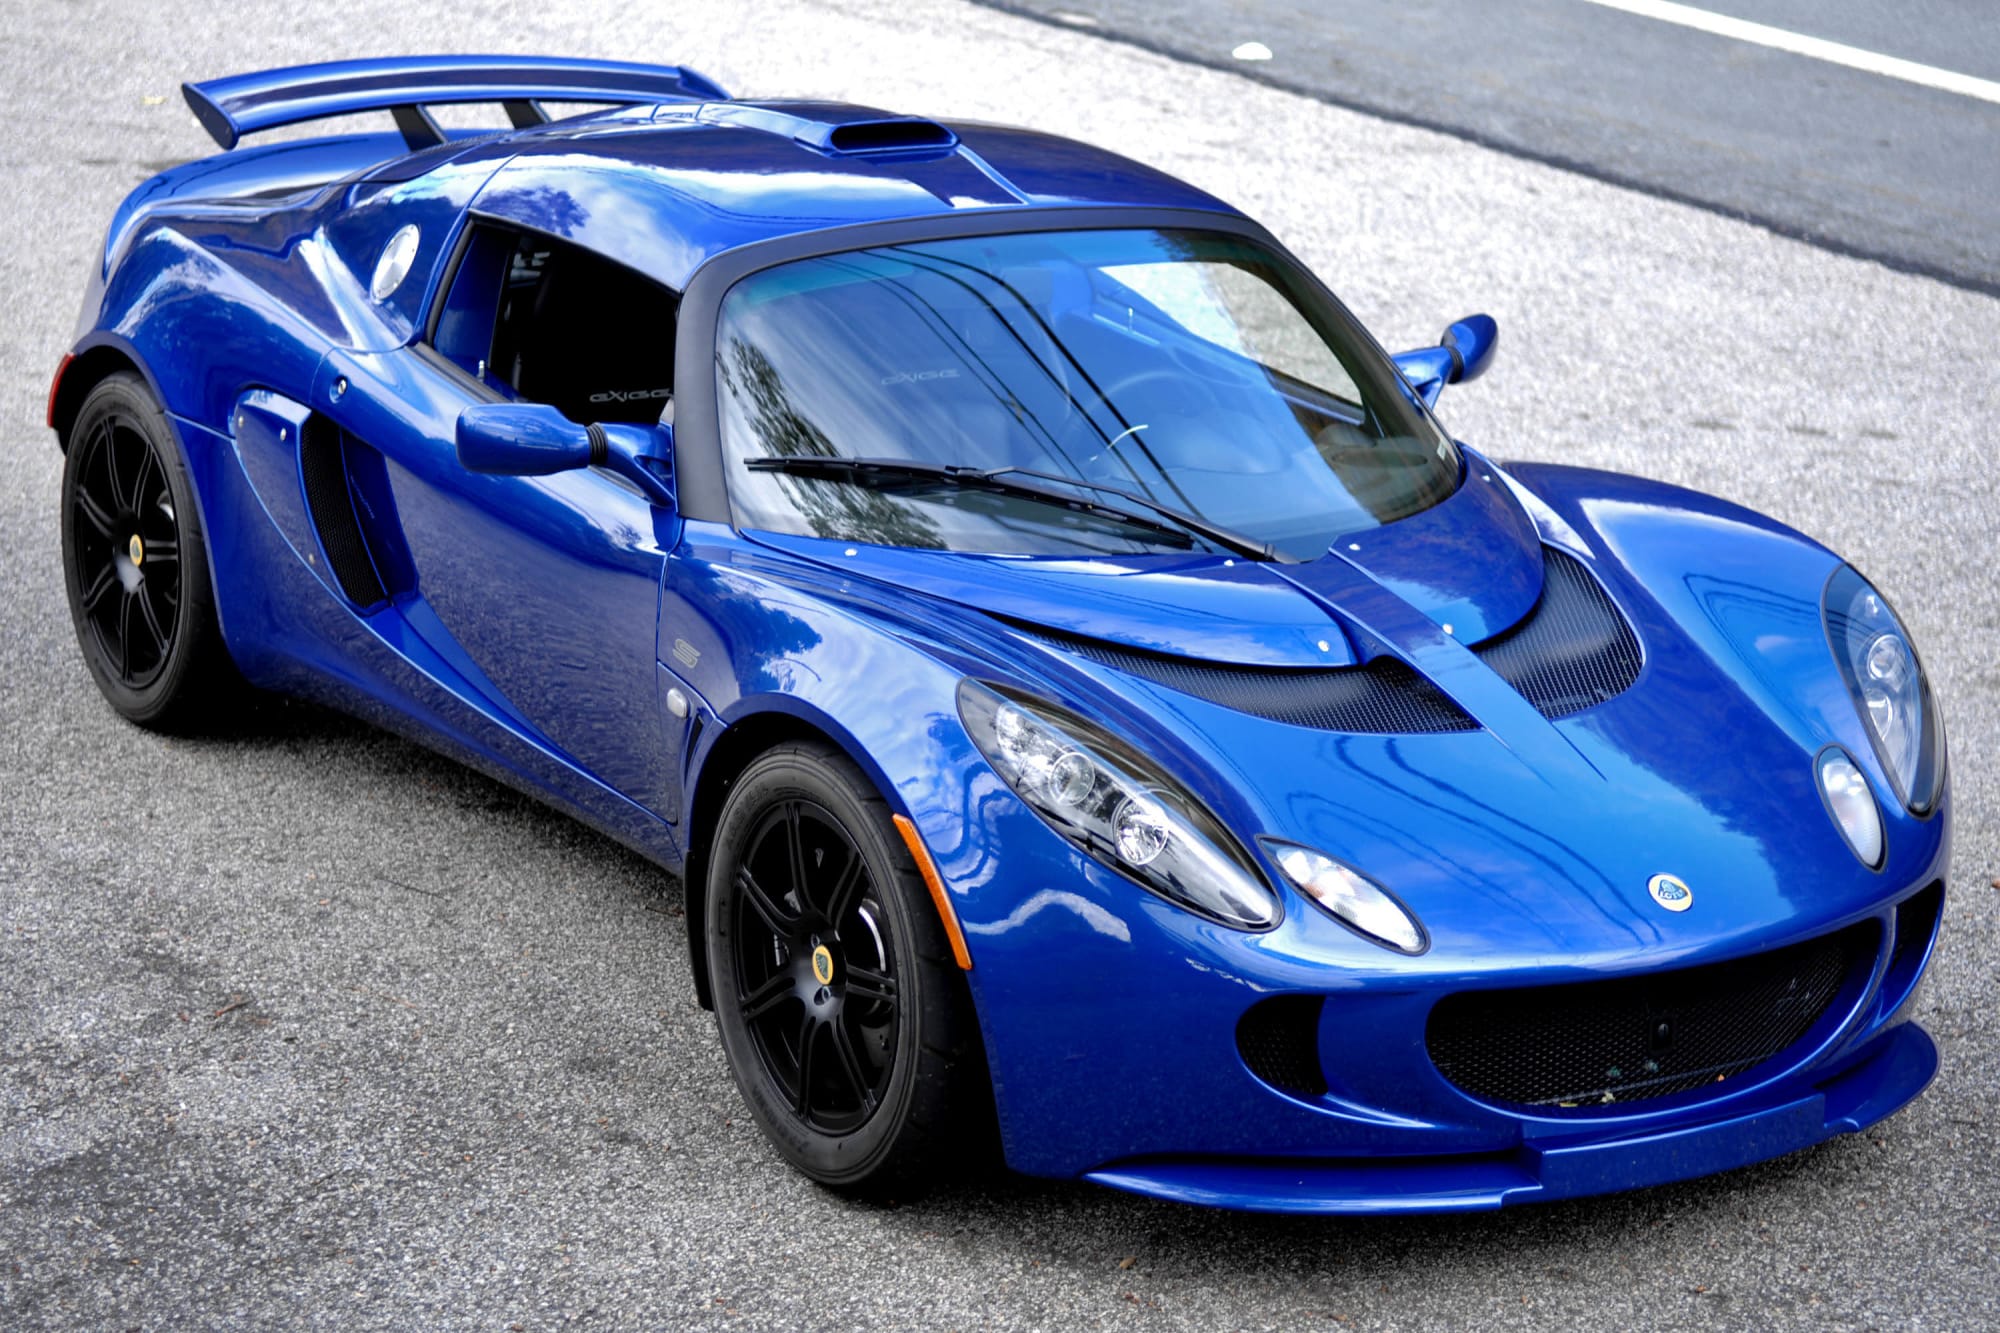 Jerry Seinfeld-Owned Badass Lotus Exige S 260 Sold For $90,400